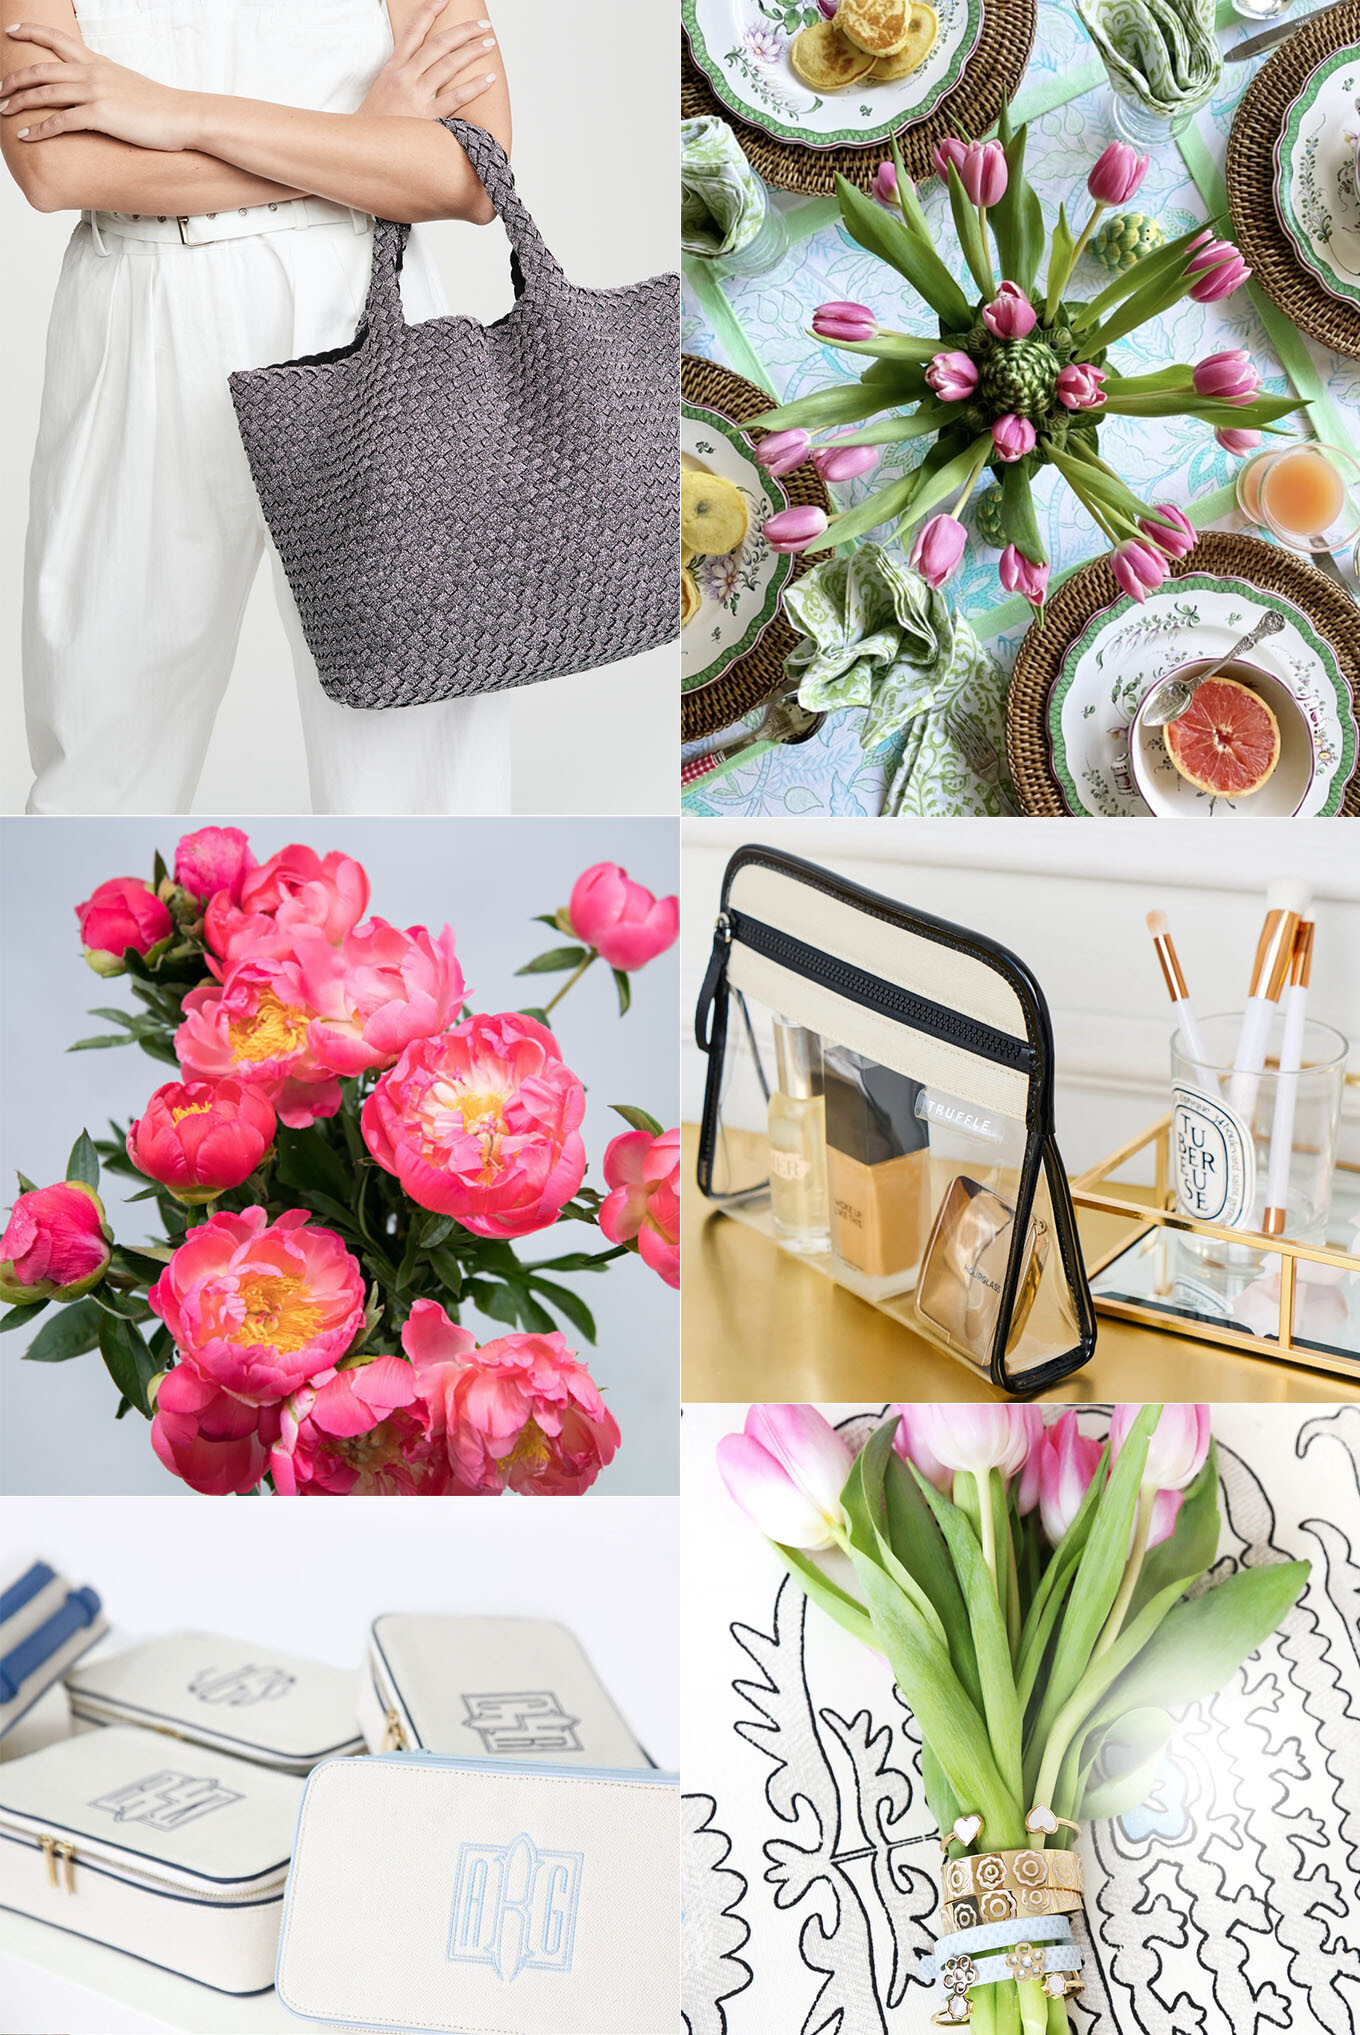 It's time to shop for Mother's Day! Find something special for your Mother and support your favorite small businesses. Shipping may take time so shop now!